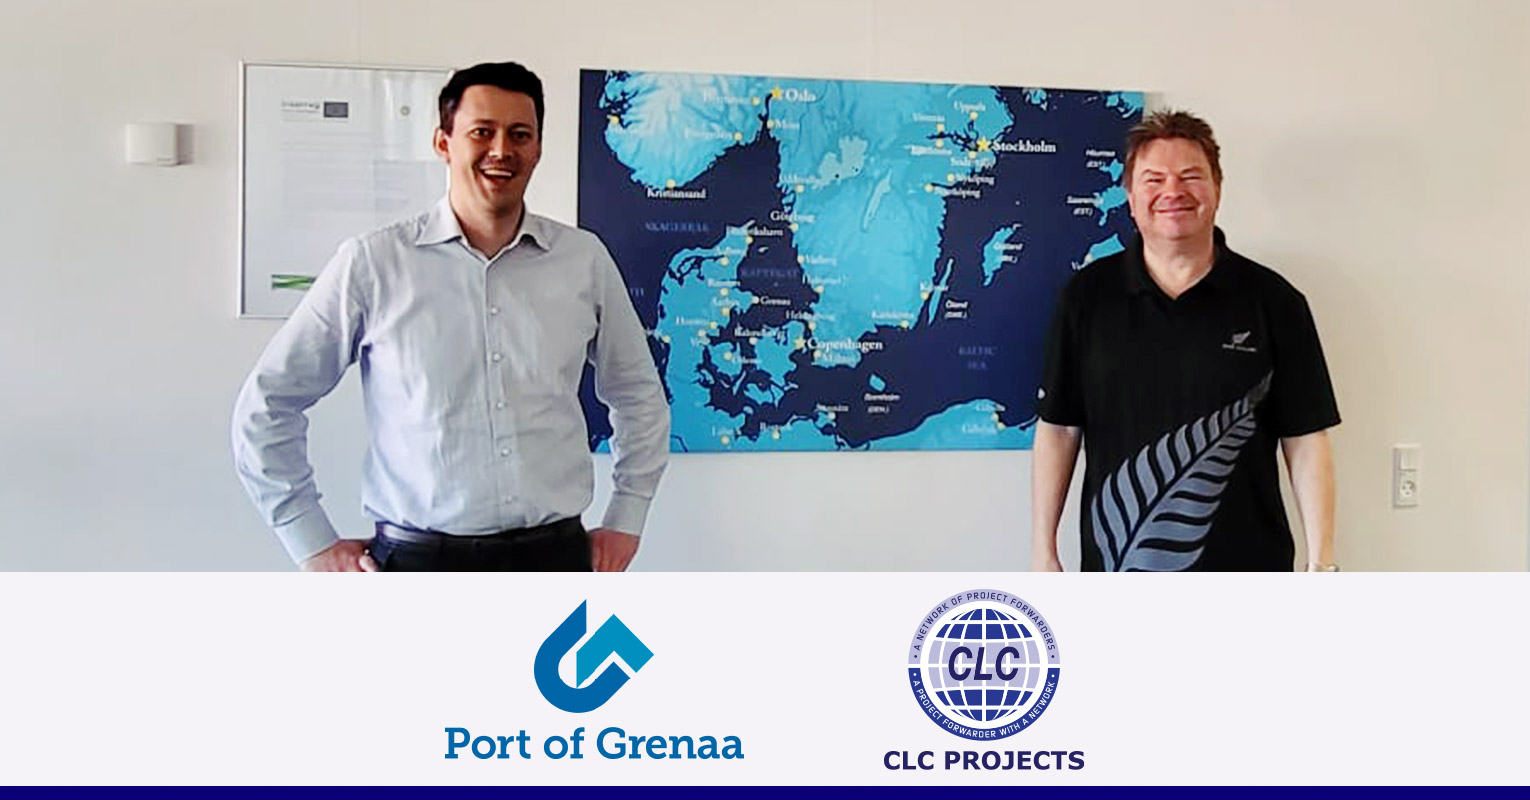 CLC Projects Chairman met with Mr. Theis Gisselbaek of Port of Grenaa today